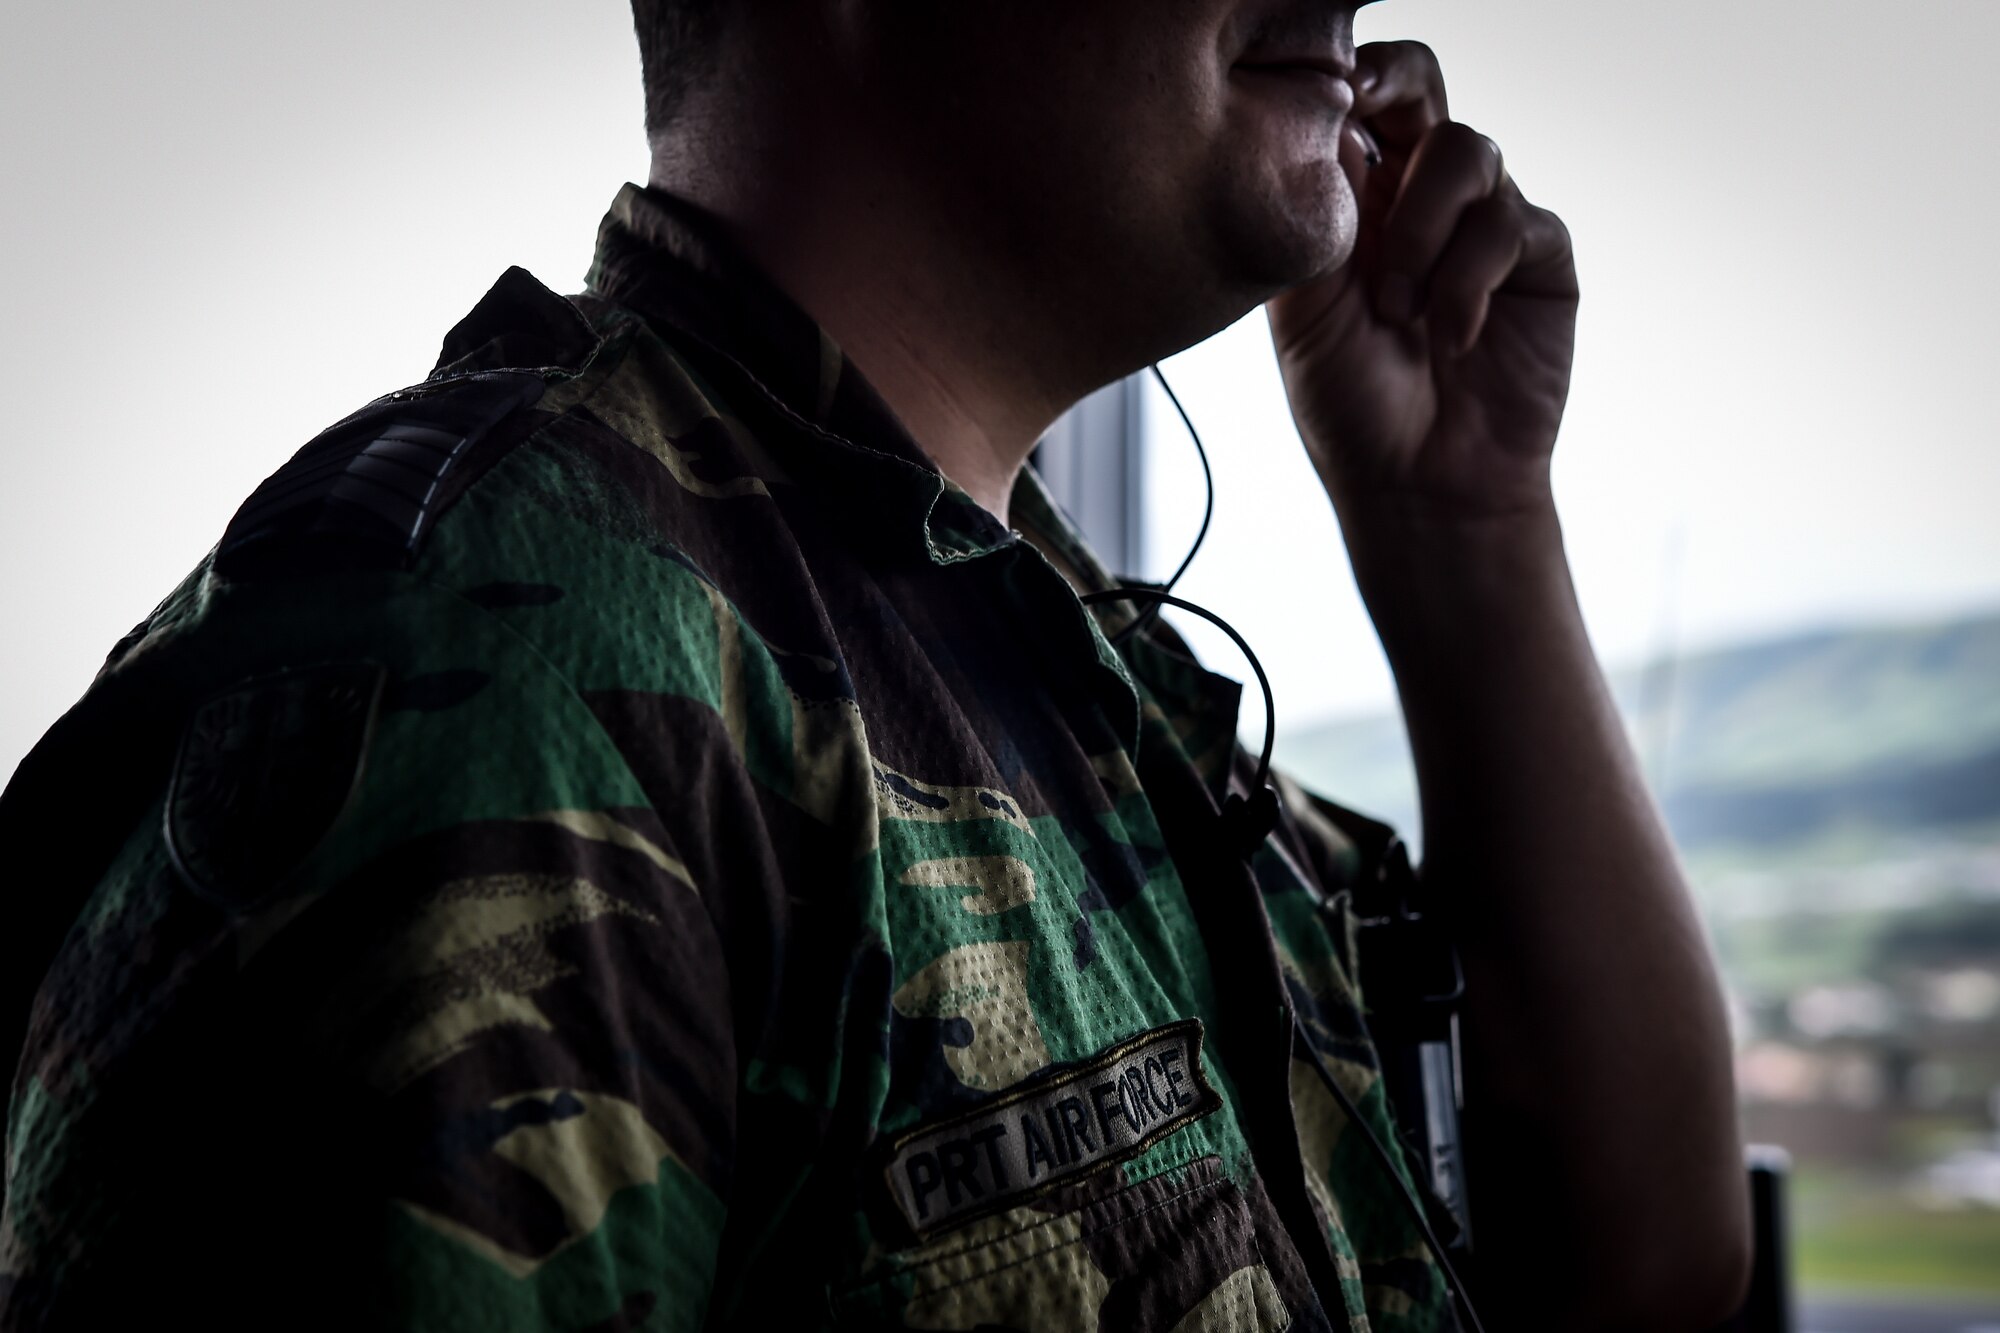 A Portuguese Air Force air traffic controller at Lajes Field, Azores, Portugal, Oct. 5, 2016. The 65th Air Base Group enables expeditionary movement of war fighters, warplanes and global communications to combatant commanders; and supports joint coalition and NATO operations to promote partnerships. (U.S. Air Force photo by Senior Airman Nicole Keim)